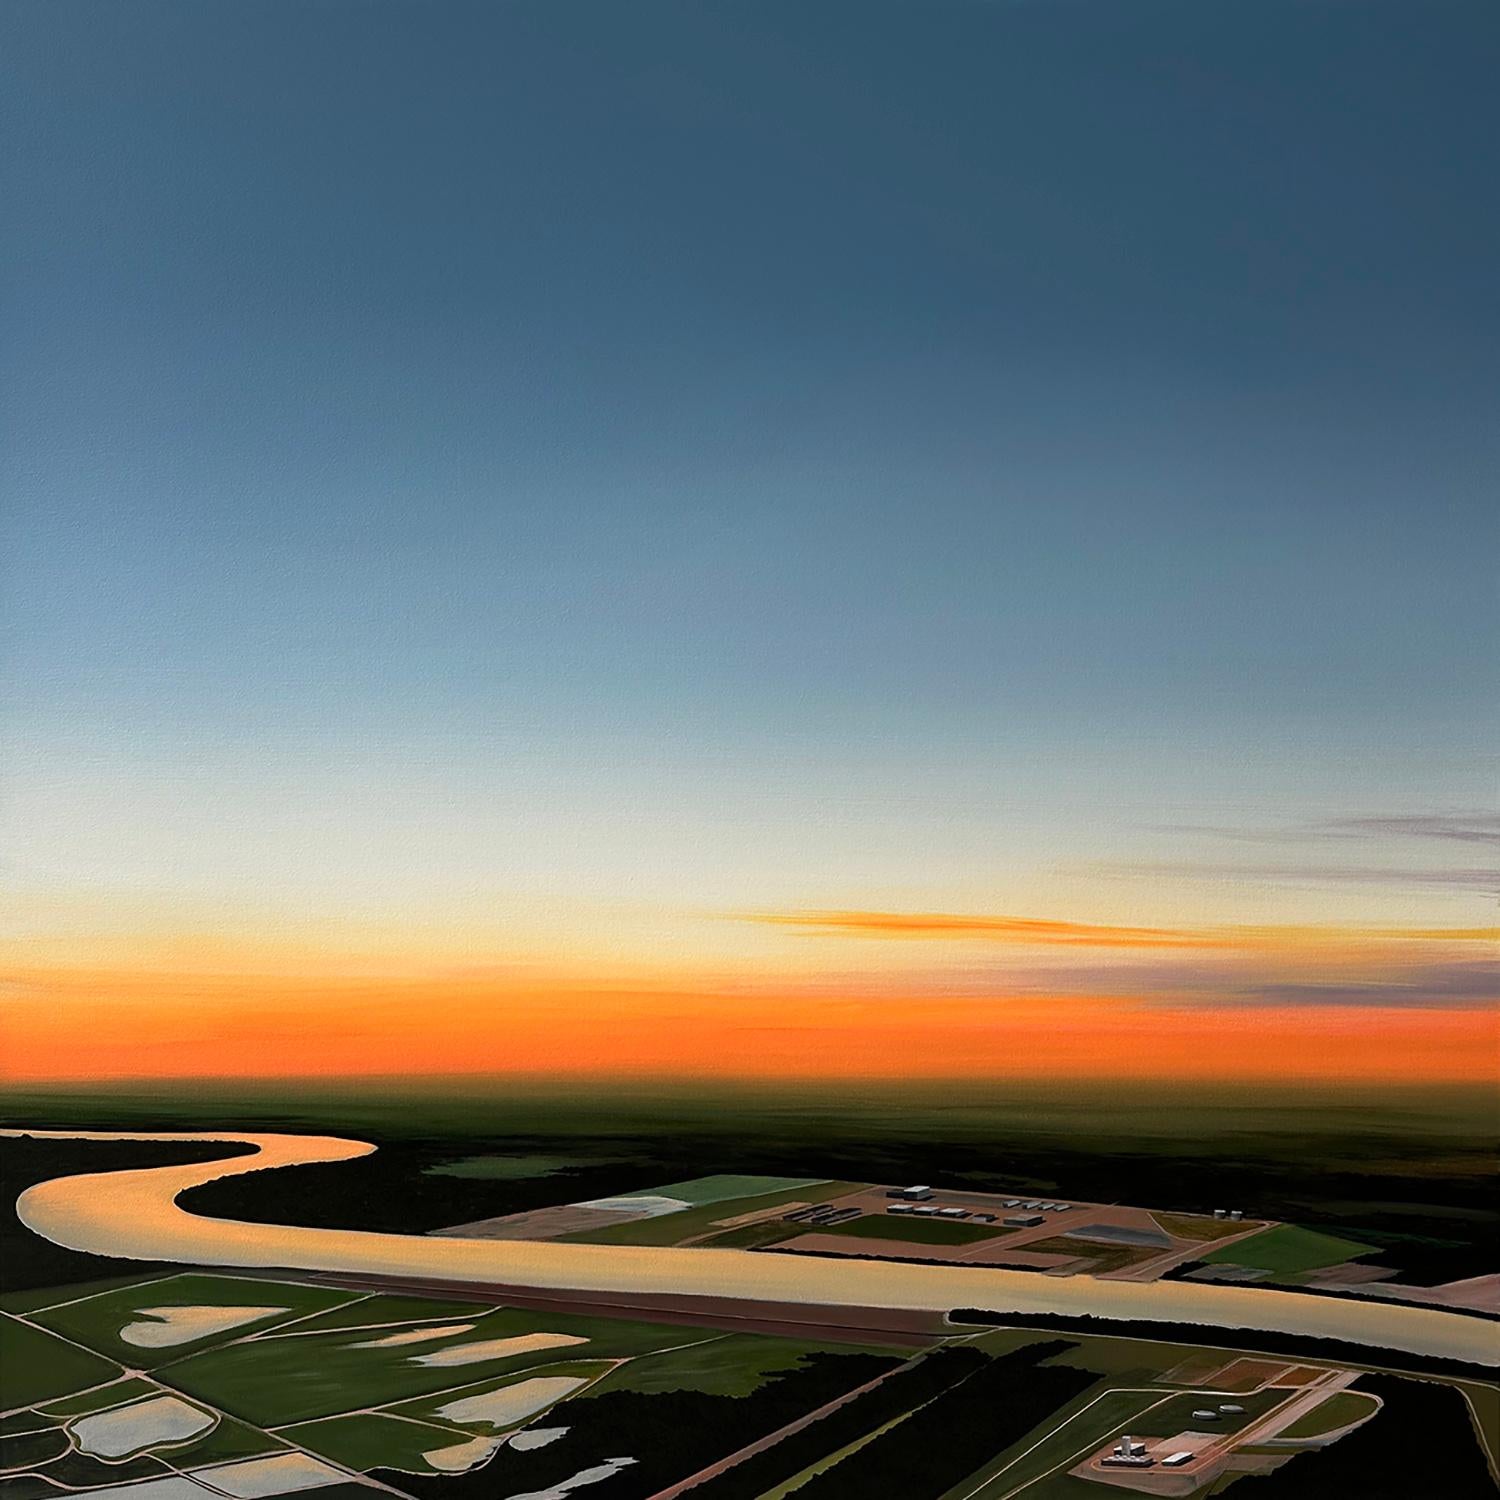 "Mississippi River (Golden Hour)", by Kristin Moore, is a part of her 2024 solo exhibition, “Through the Bayou, Into the Garden”, at Ferrara Showman Gallery. Marking a transition from her previous work, "Mississippi River (Golden Hour)" shows